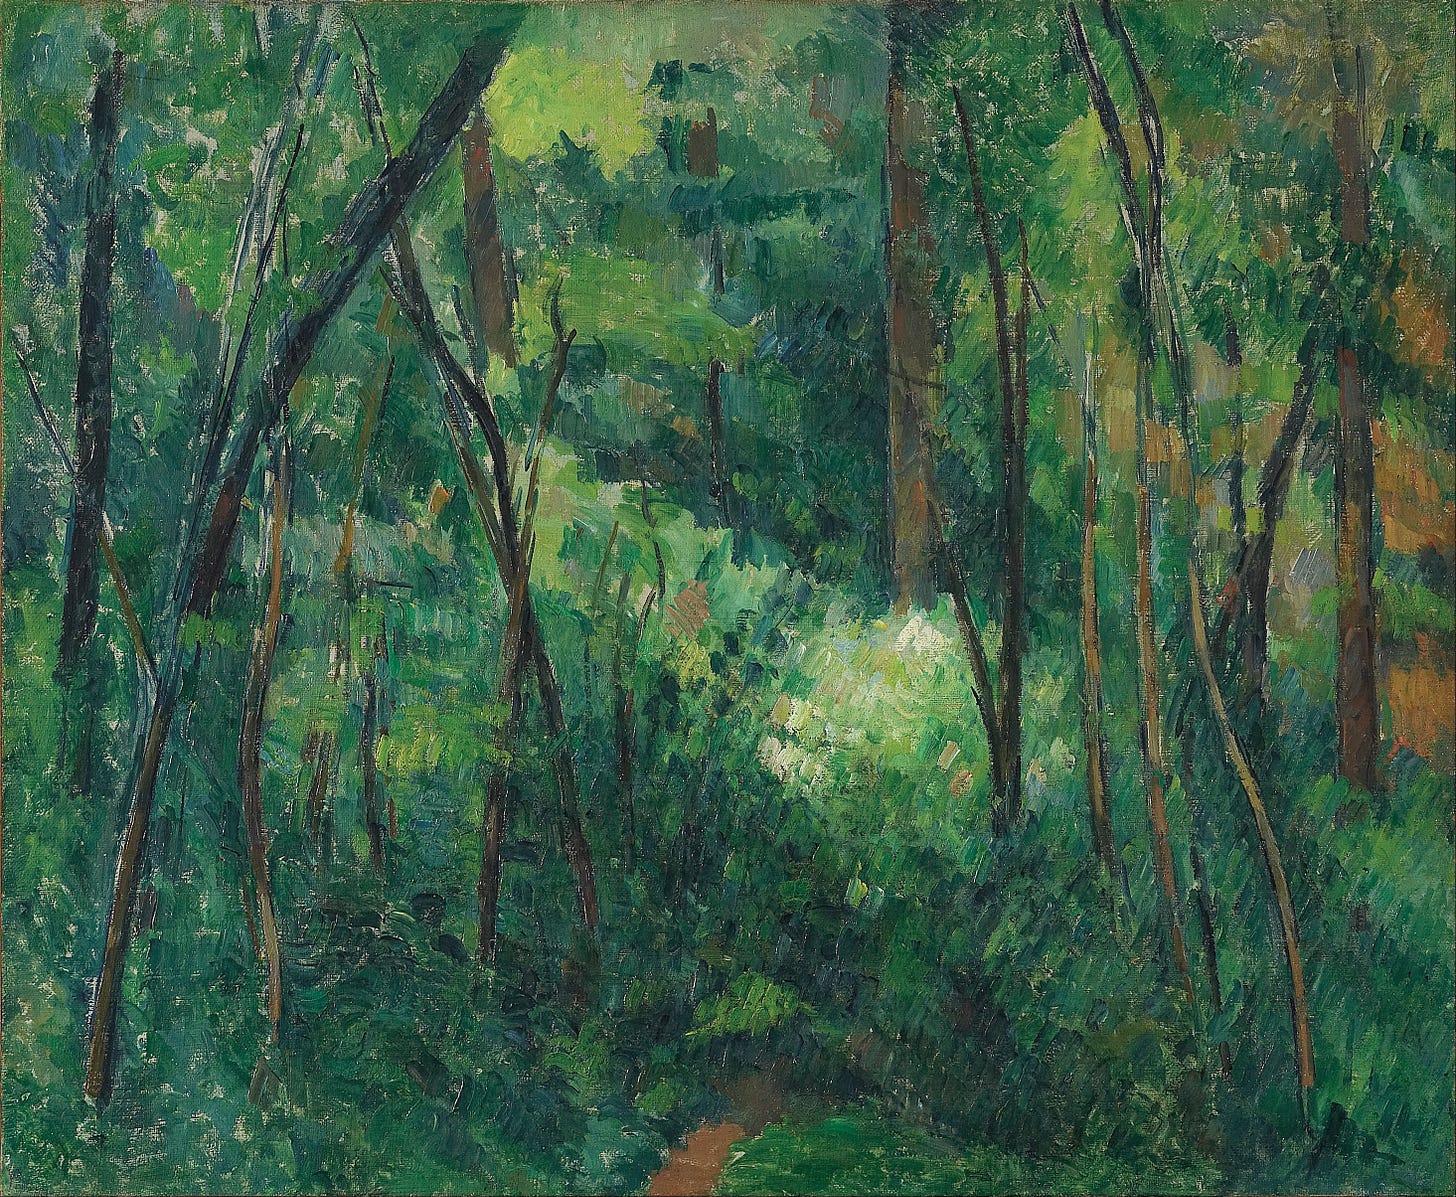 File:Paul Cézanne - Interior of a forest - Google Art Project.jpg ...